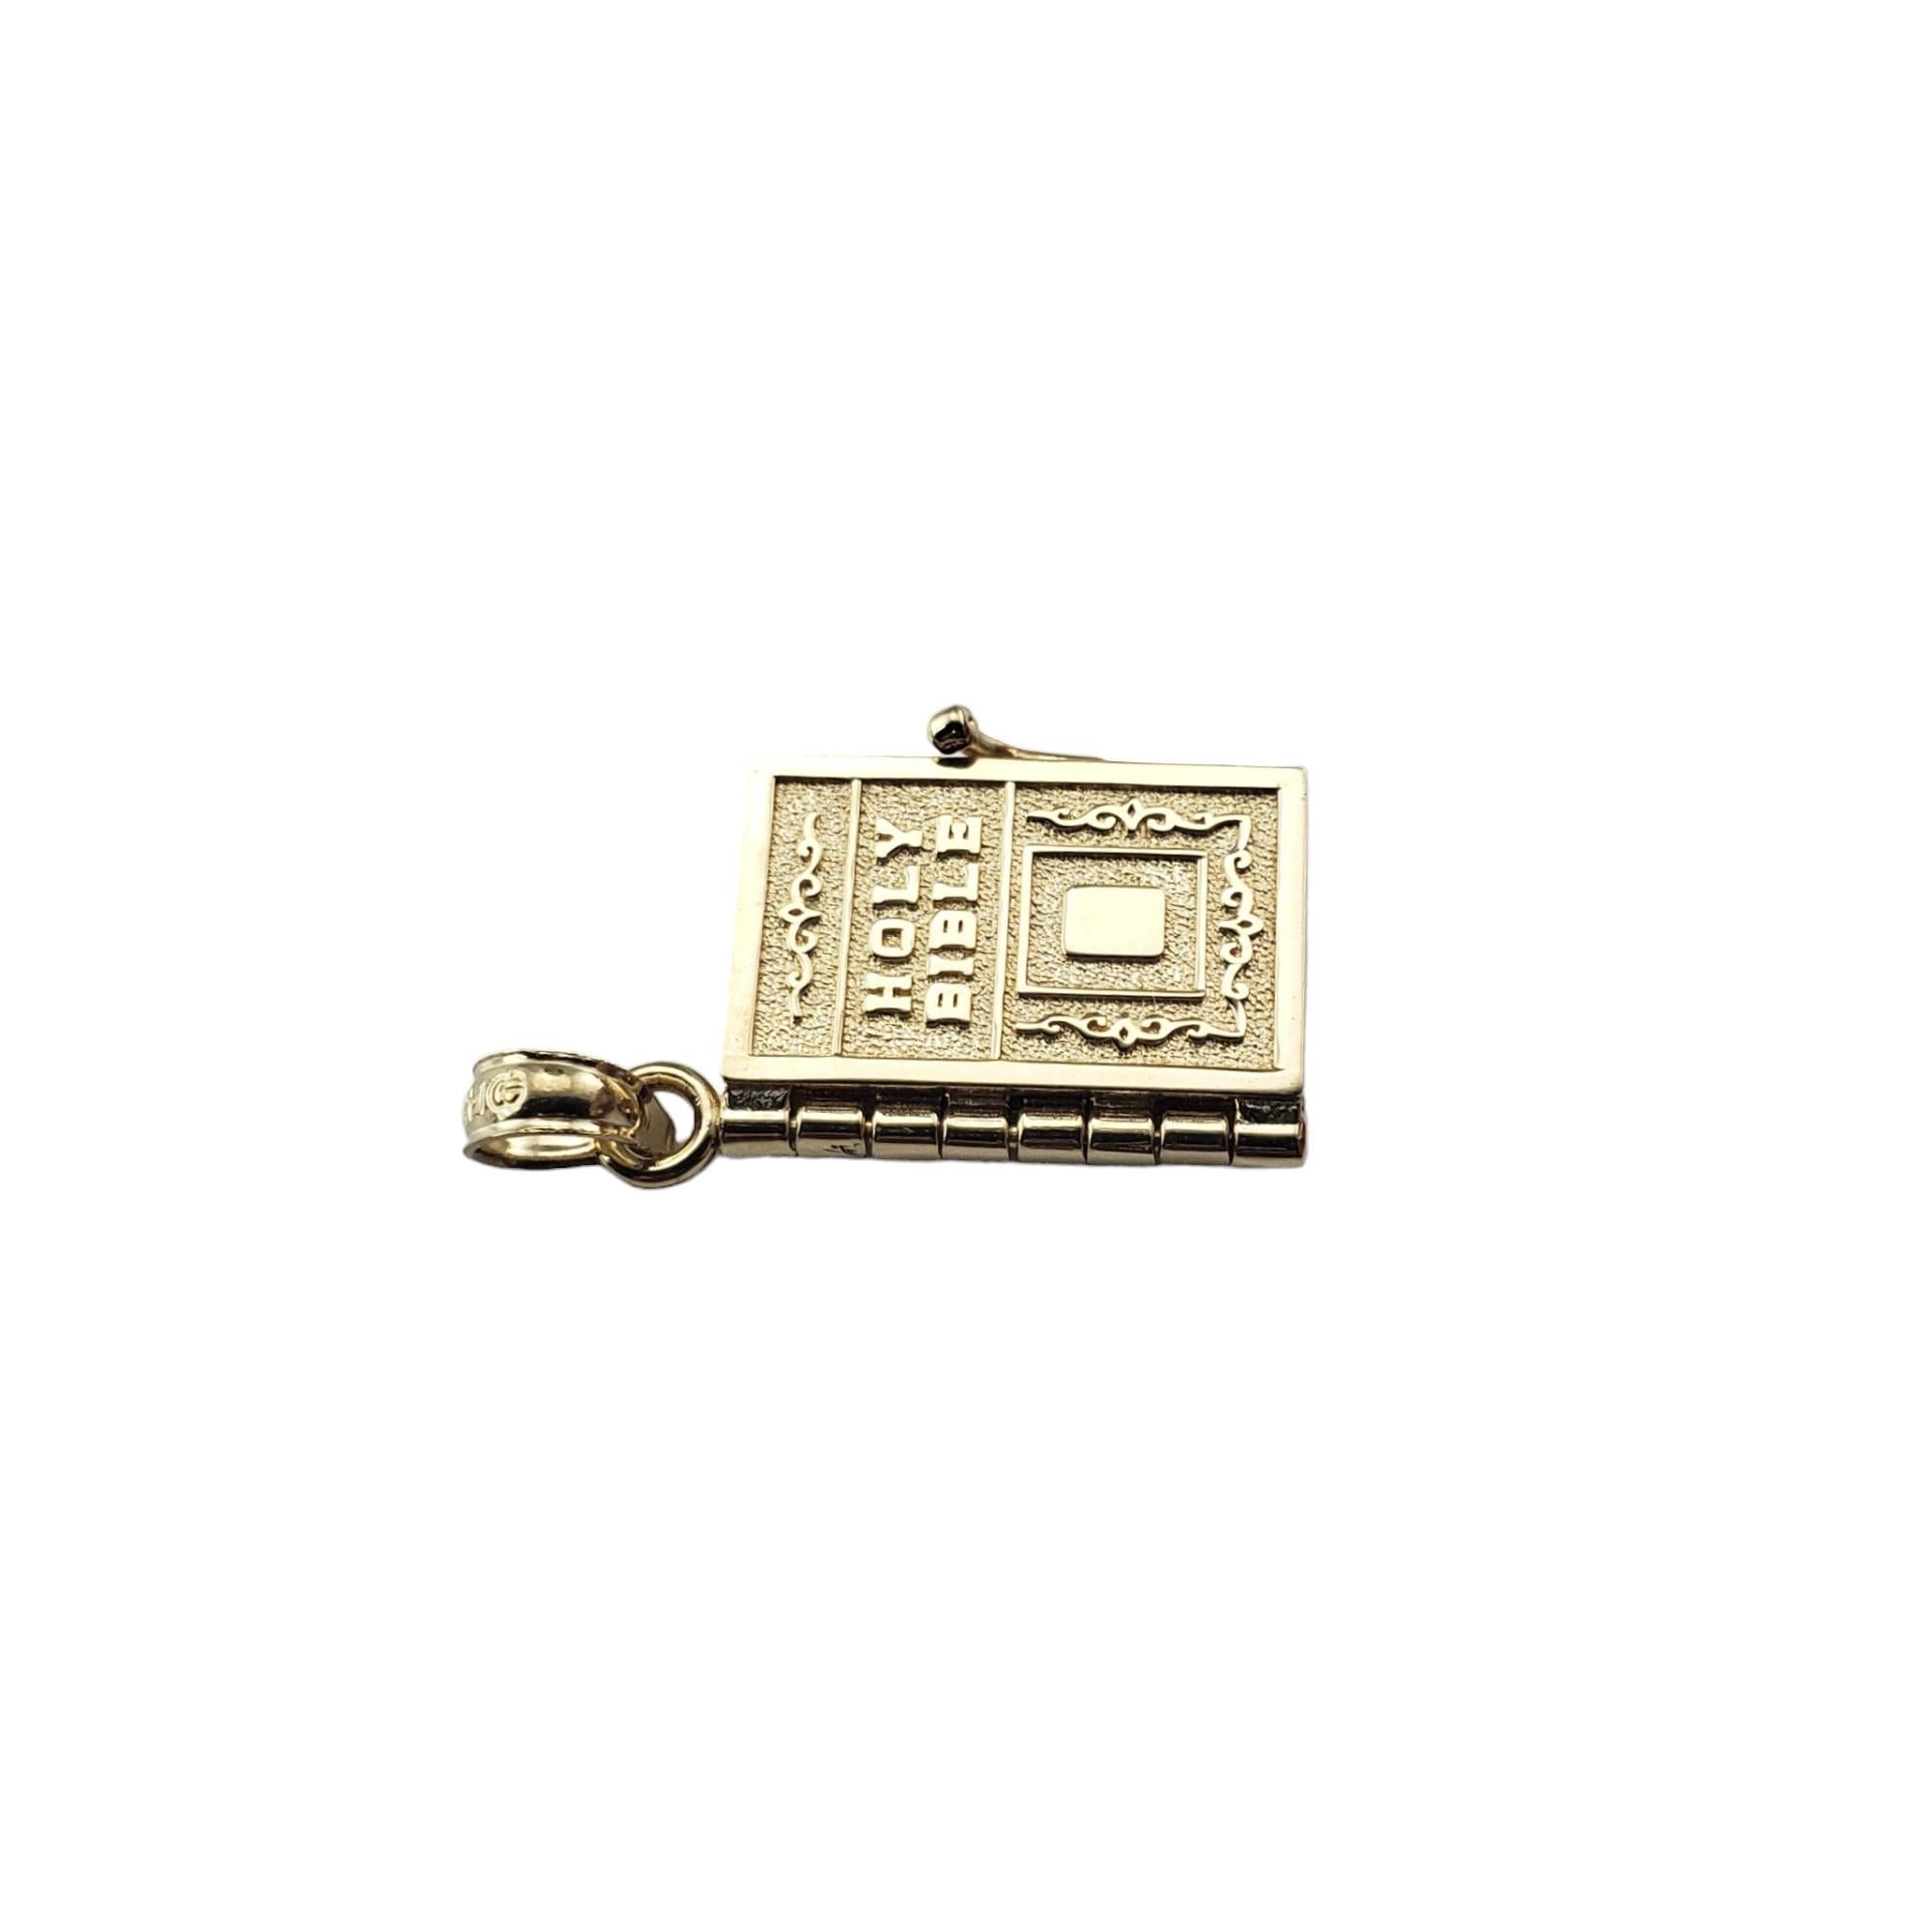 Vintage 14 Karat Yellow Gold Holy Bible Charm-

This lovely hinged charm features the Holy Bible crafted in beautifully detailed 14K yellow gold.  Opens to reveal The Lord's Prayer.

Size: 15.2 mm x 11.3 mm

Stamped: 14K

Weight: 3.2 gr./ 2.0